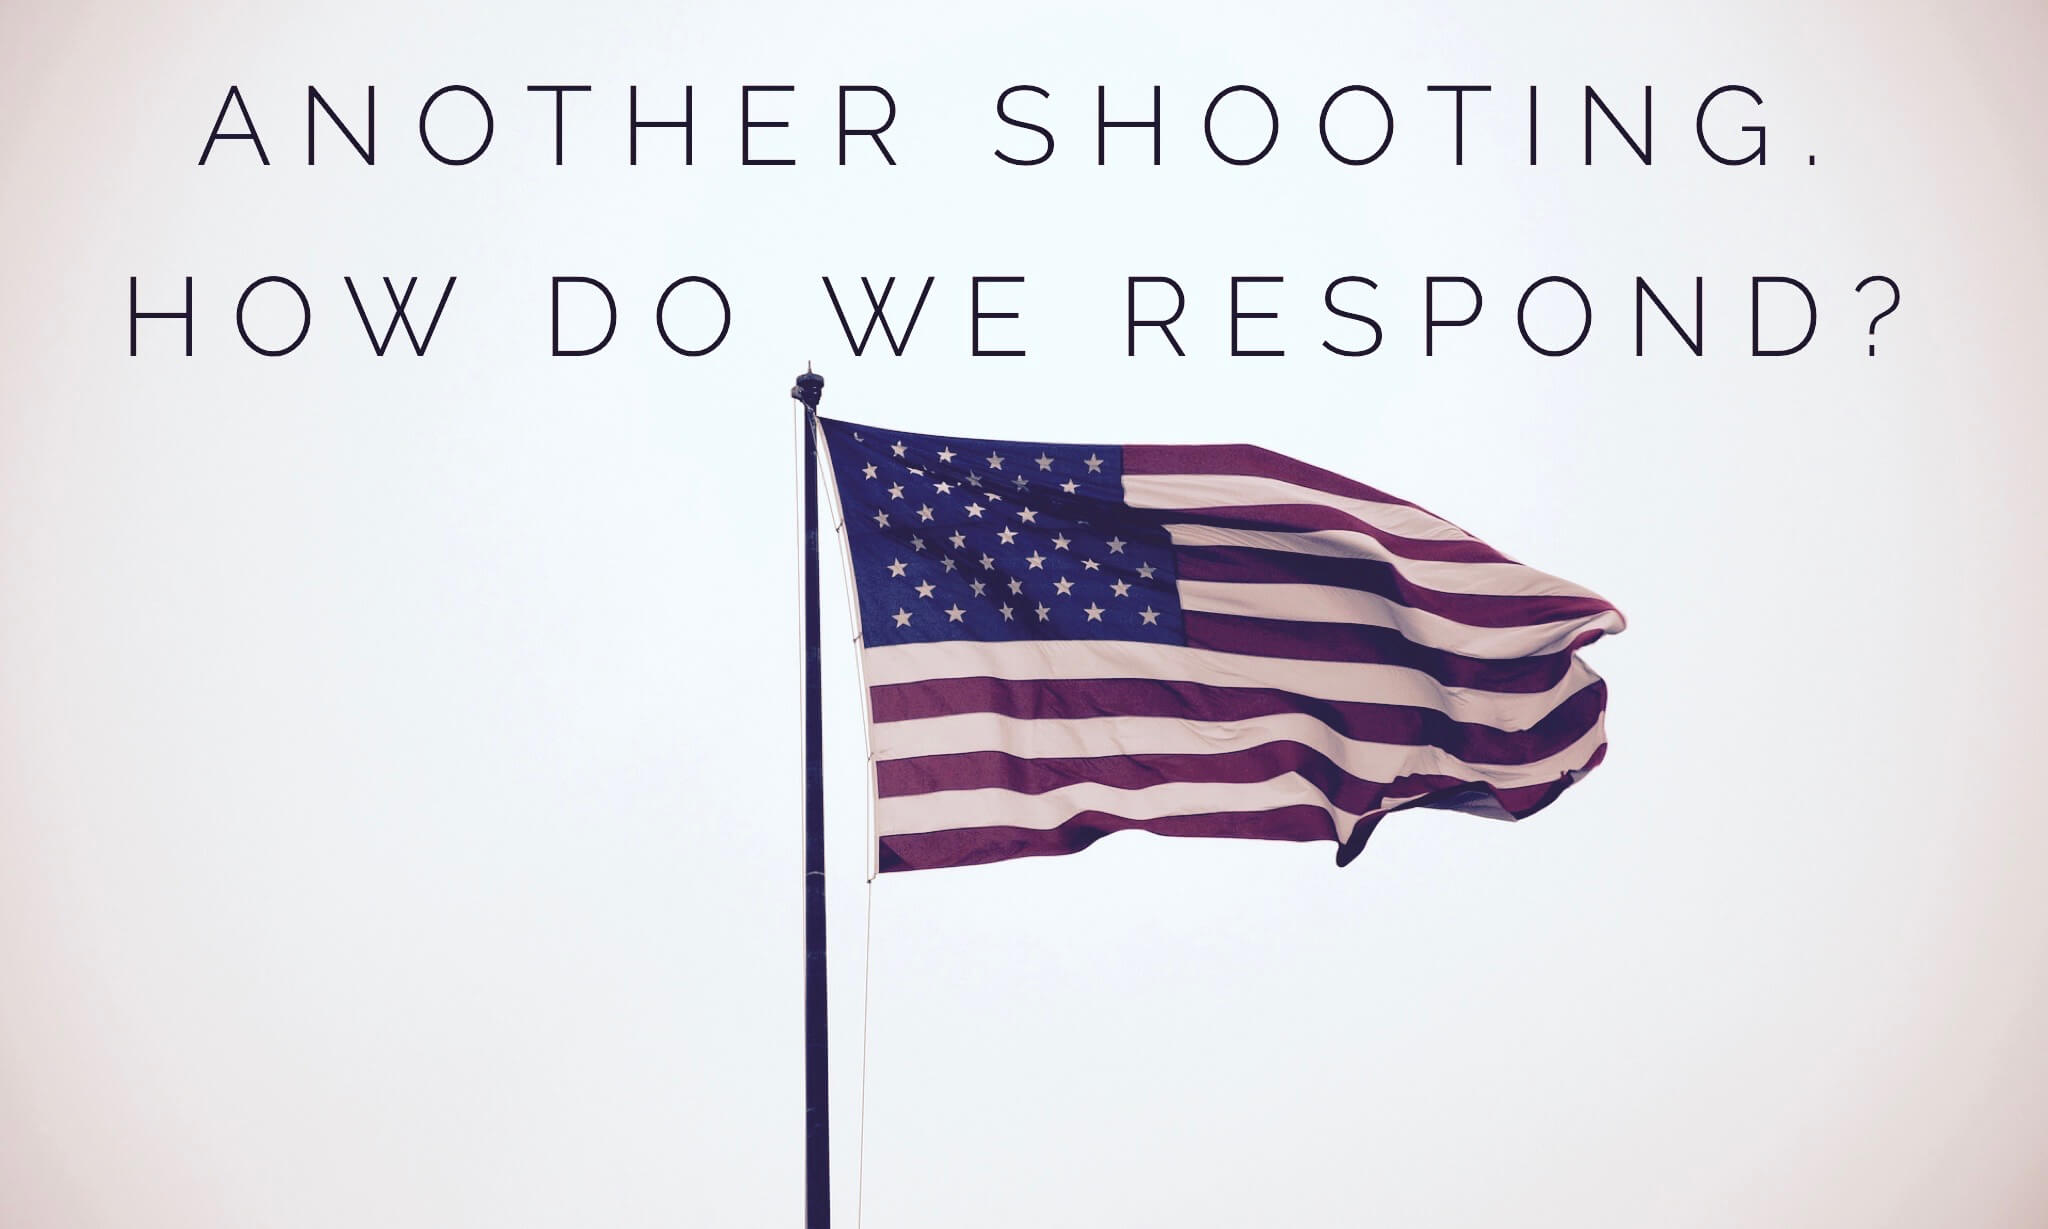 How to Respond After Another Mass Shooting in America